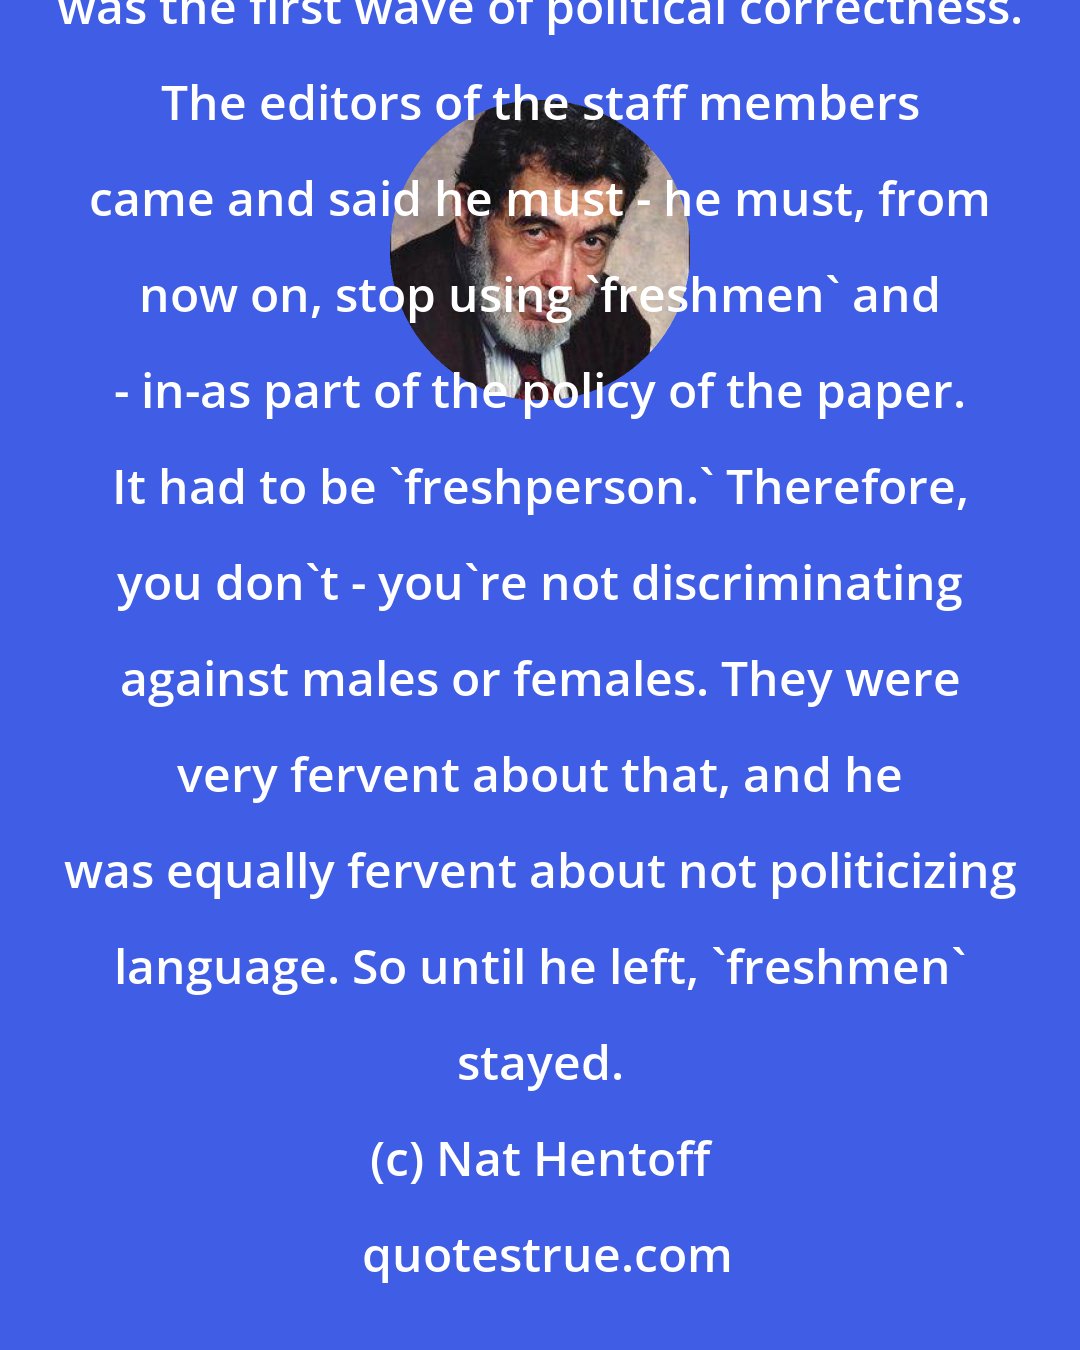 Nat Hentoff: Tom [Hentoff] - it started when he was the editor of the paper at Wesleyan and the - members of the staff. This was the first wave of political correctness. The editors of the staff members came and said he must - he must, from now on, stop using `freshmen' and - in-as part of the policy of the paper. It had to be `freshperson.' Therefore, you don't - you're not discriminating against males or females. They were very fervent about that, and he was equally fervent about not politicizing language. So until he left, `freshmen' stayed.